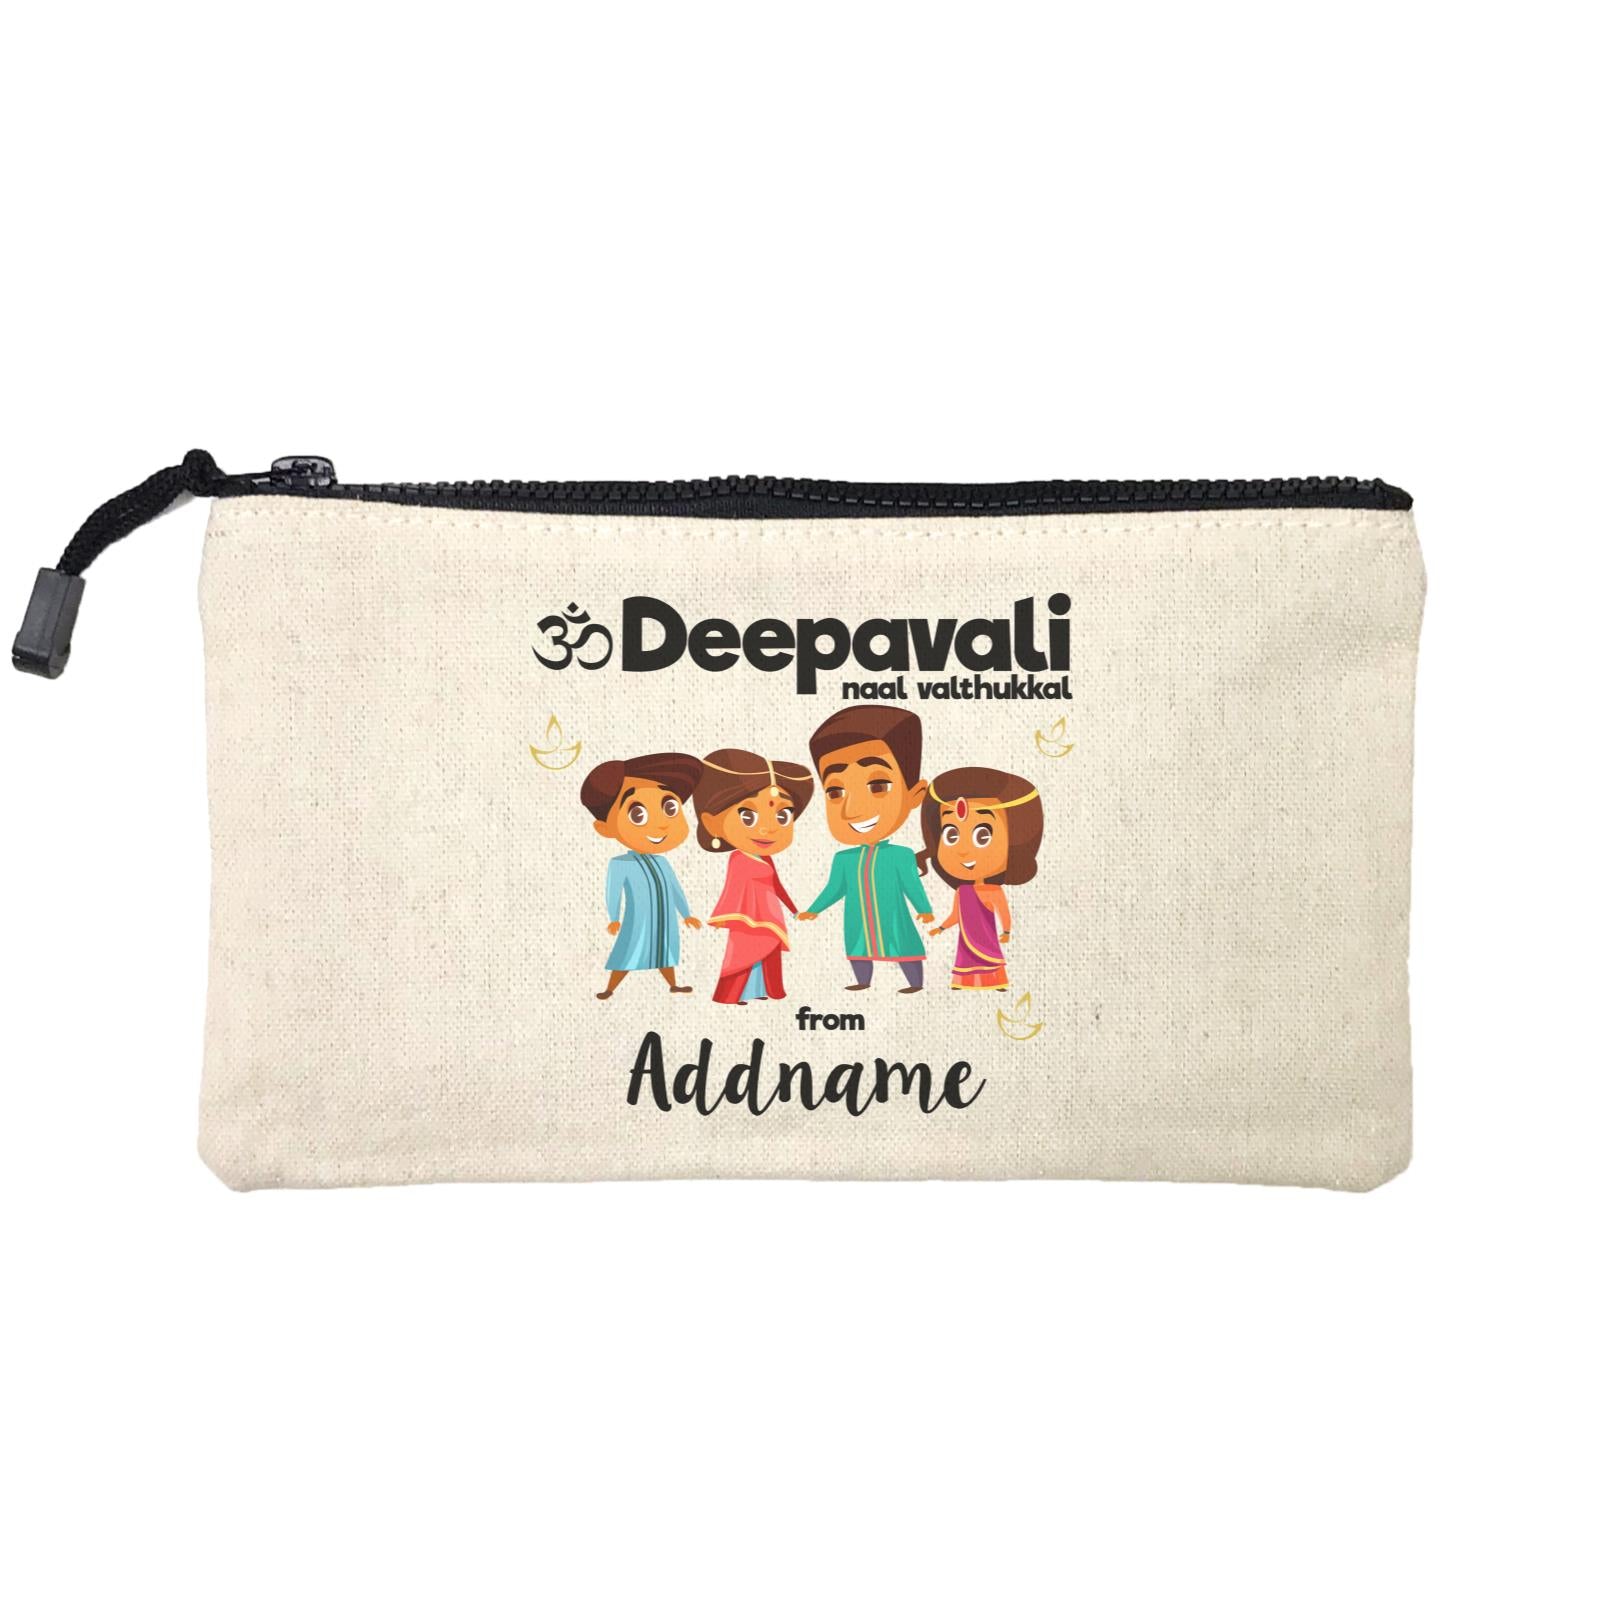 Cute Family Of Four OM Deepavali From Addname Mini Accessories Stationery Pouch